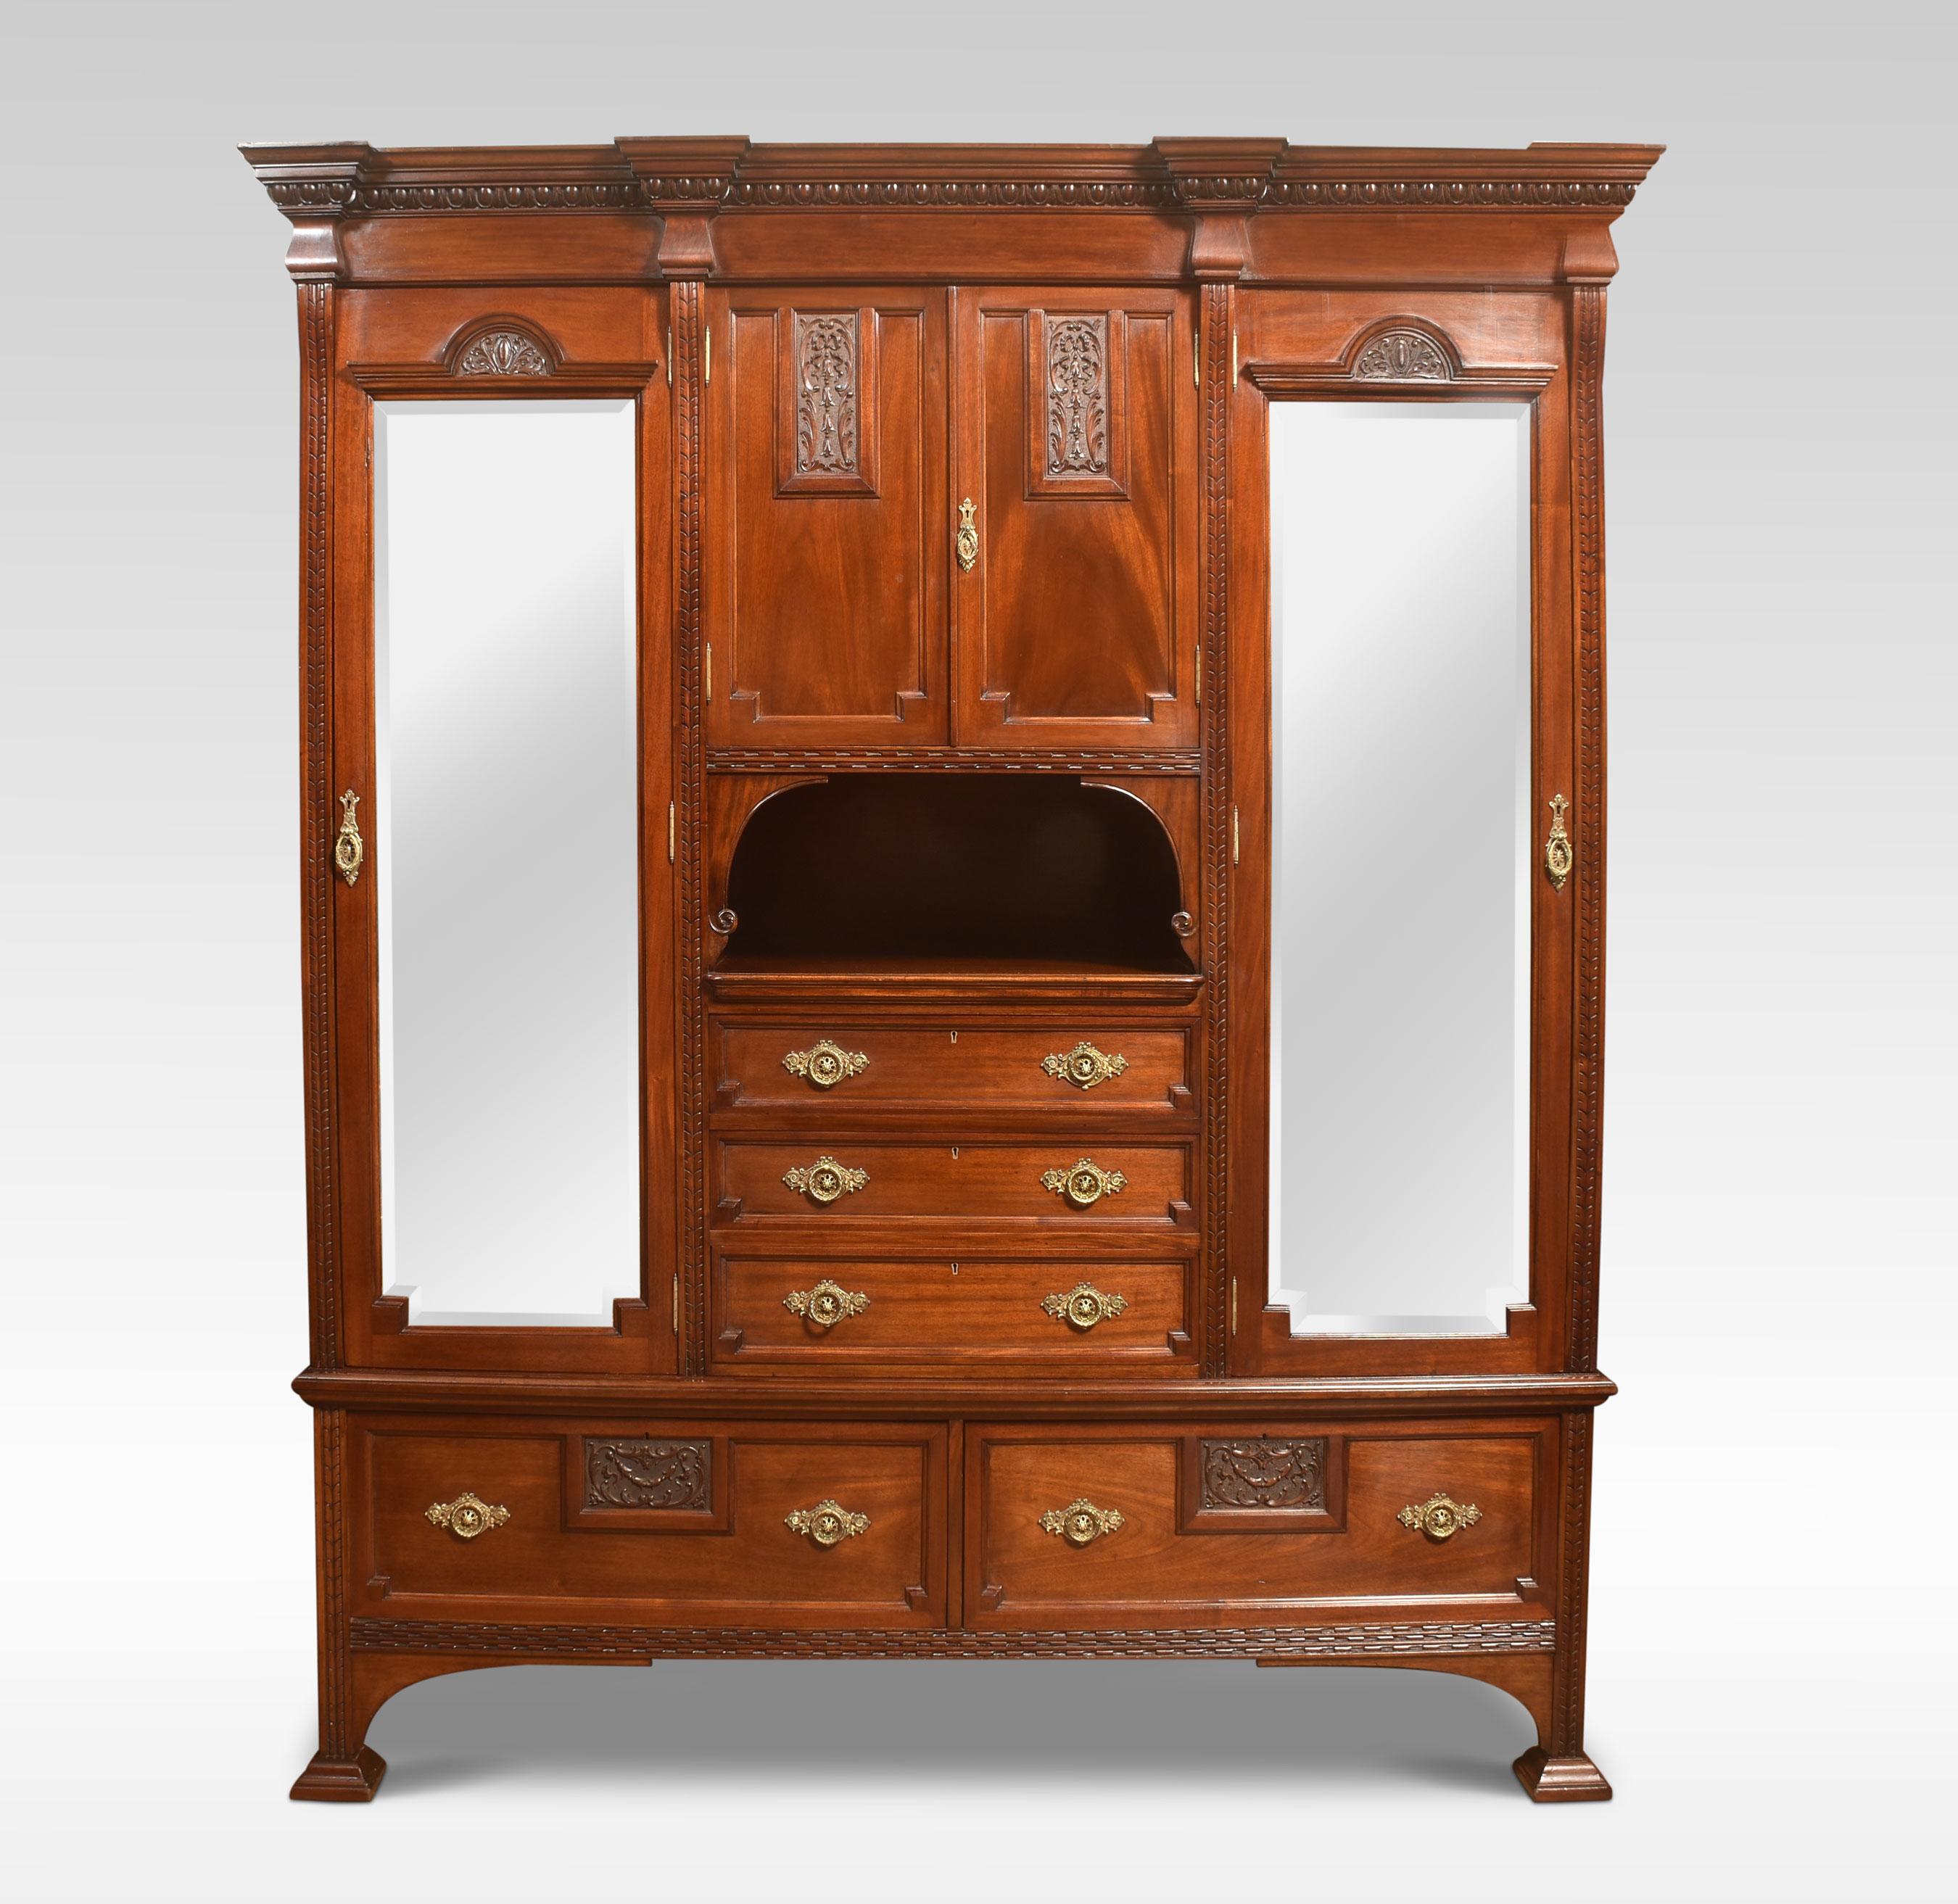 Carved mahogany compactum wardrobe having carved removable finials, above two long mirror doors flanking the centre fitted with a pair of carved panelled doors and three drawers below. To the base section fitted with two large drawers having brass